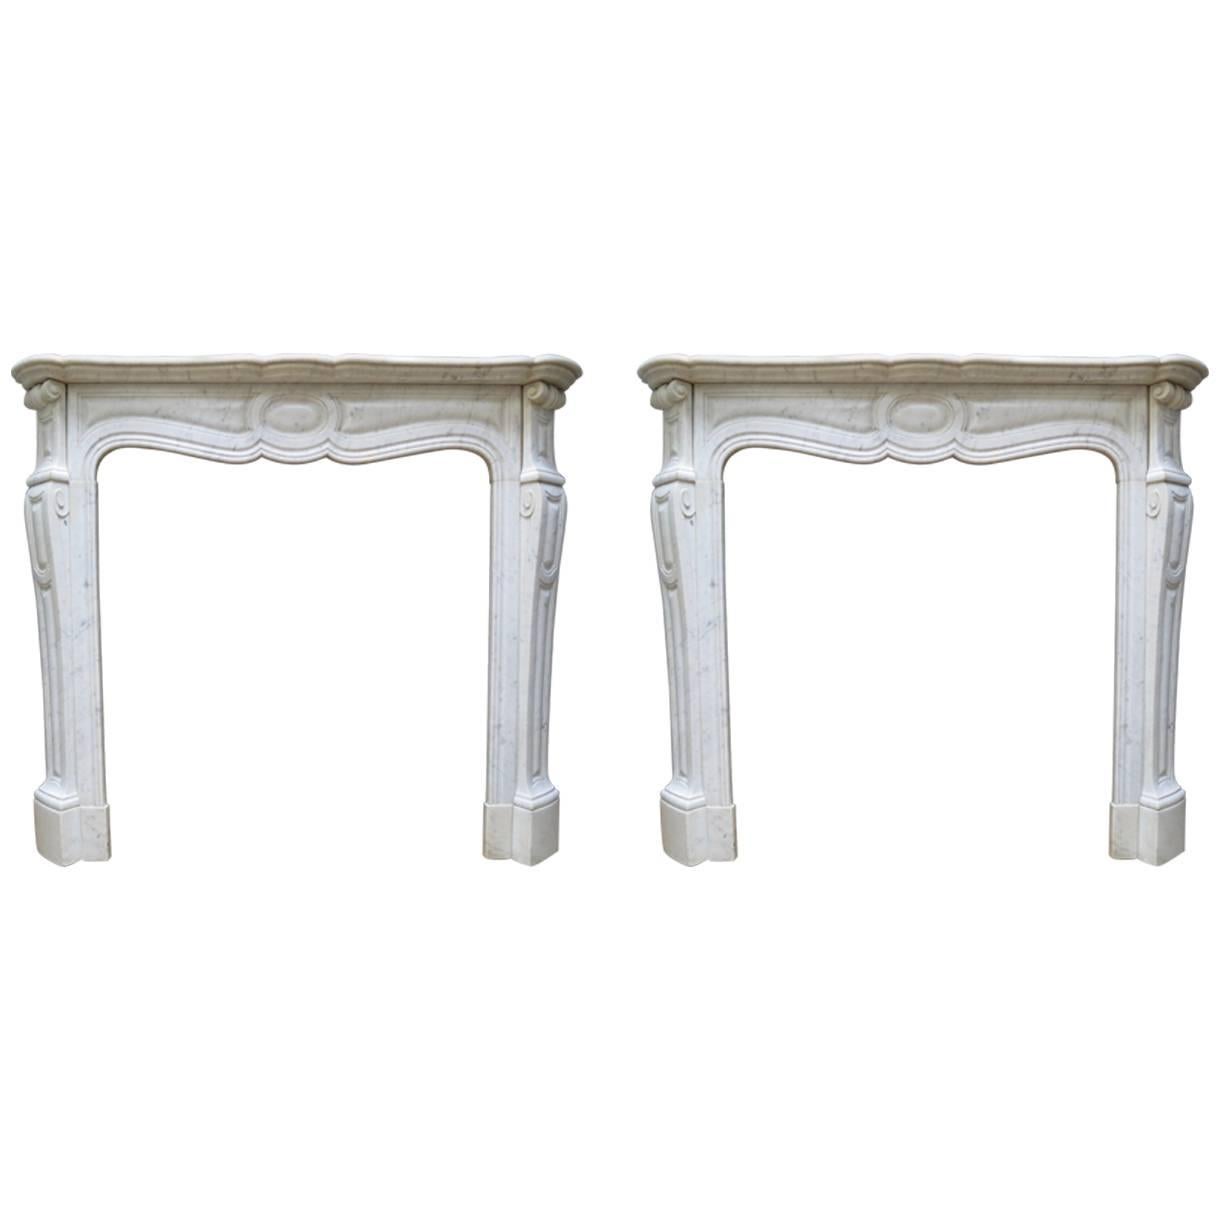 Pair of French Antique 18th Century Style Fireplace Mantels